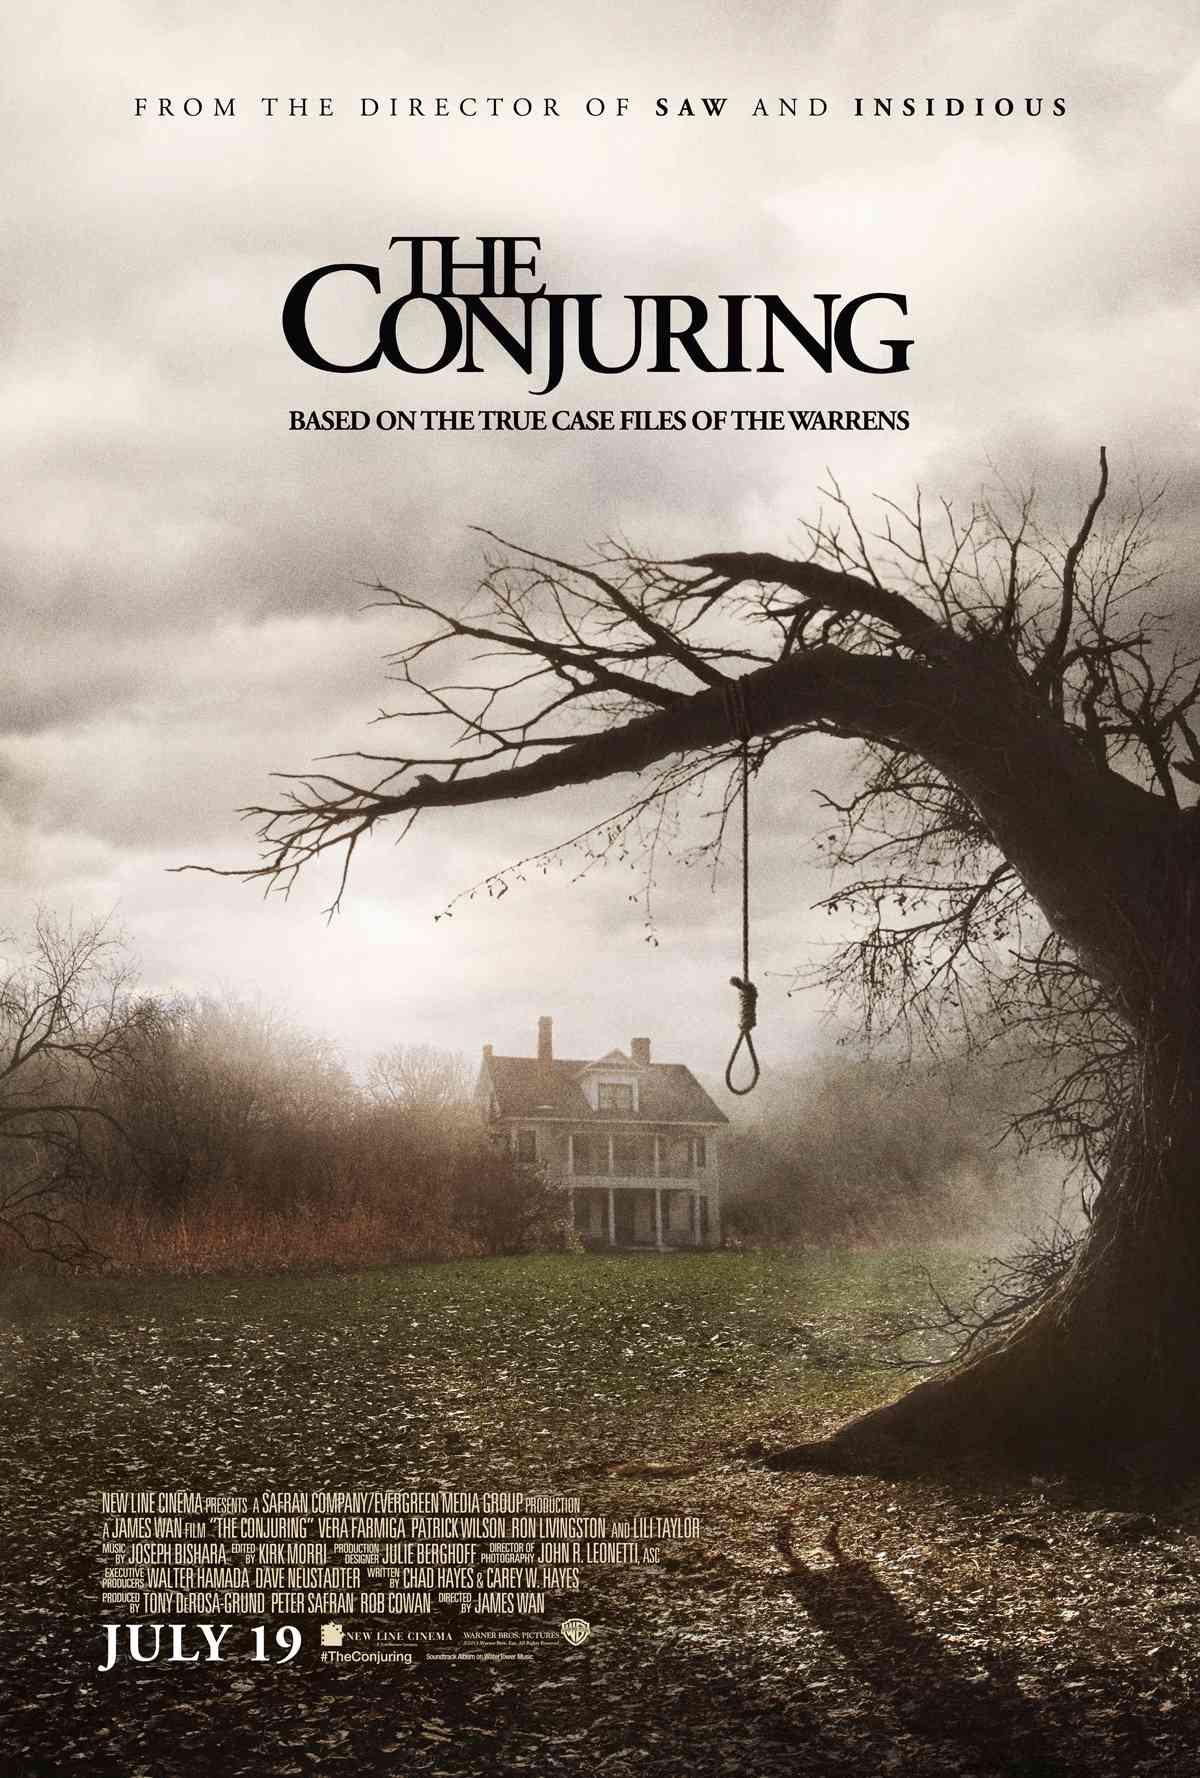 FULL MOVIE: The Conjuring (2013)